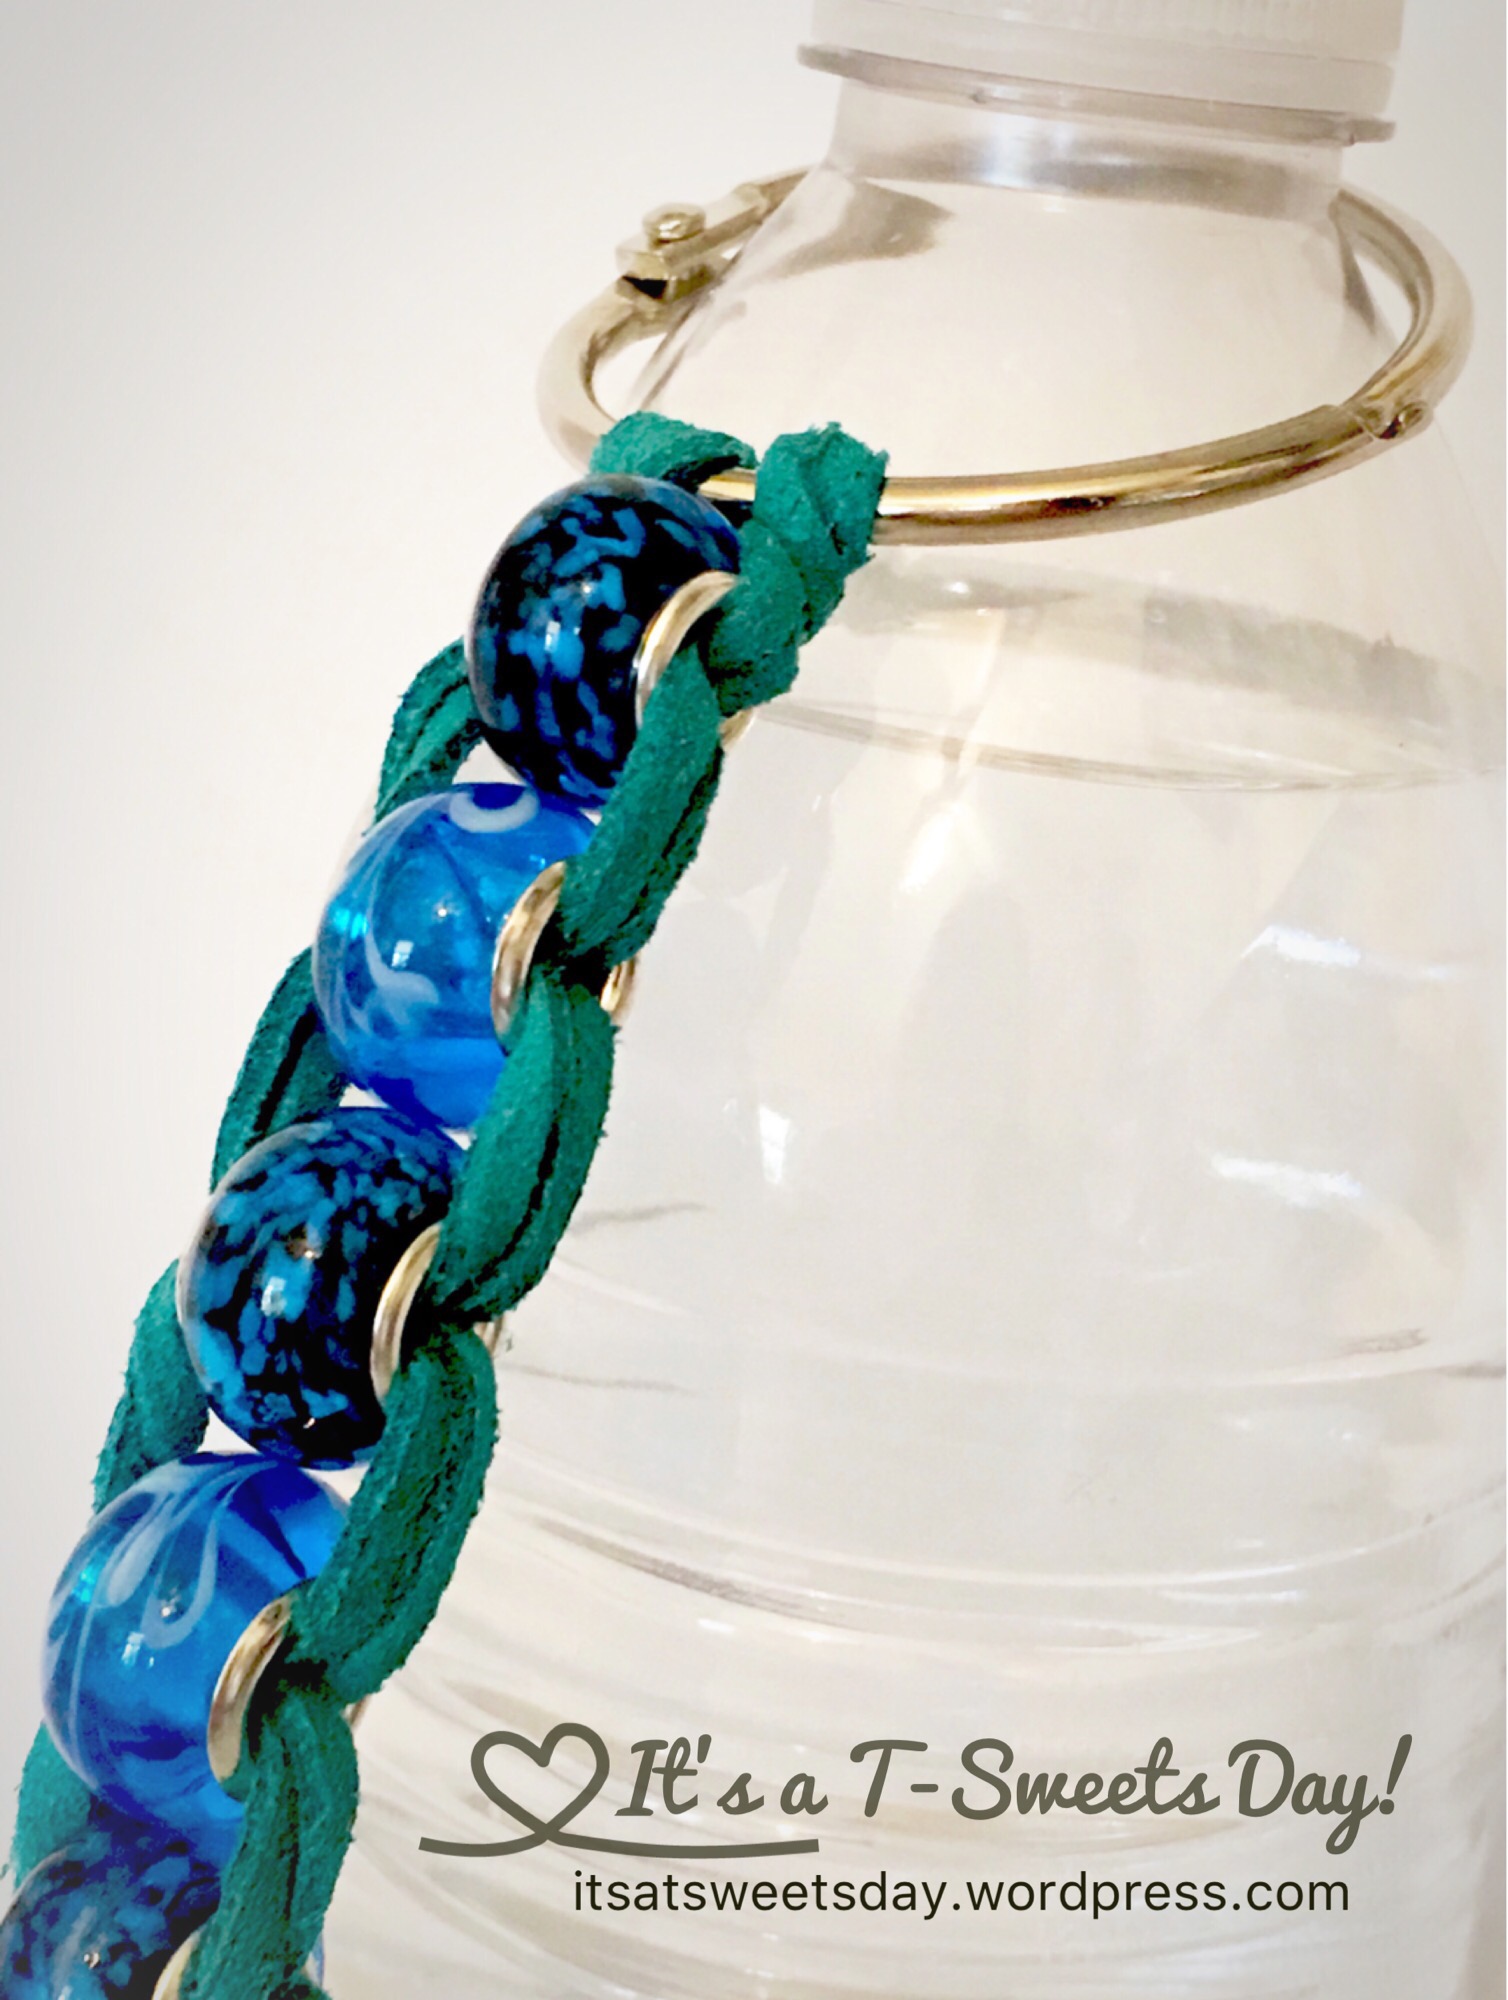 How to make a Bead Water Bottle Tracker – It's a T-Sweets day!